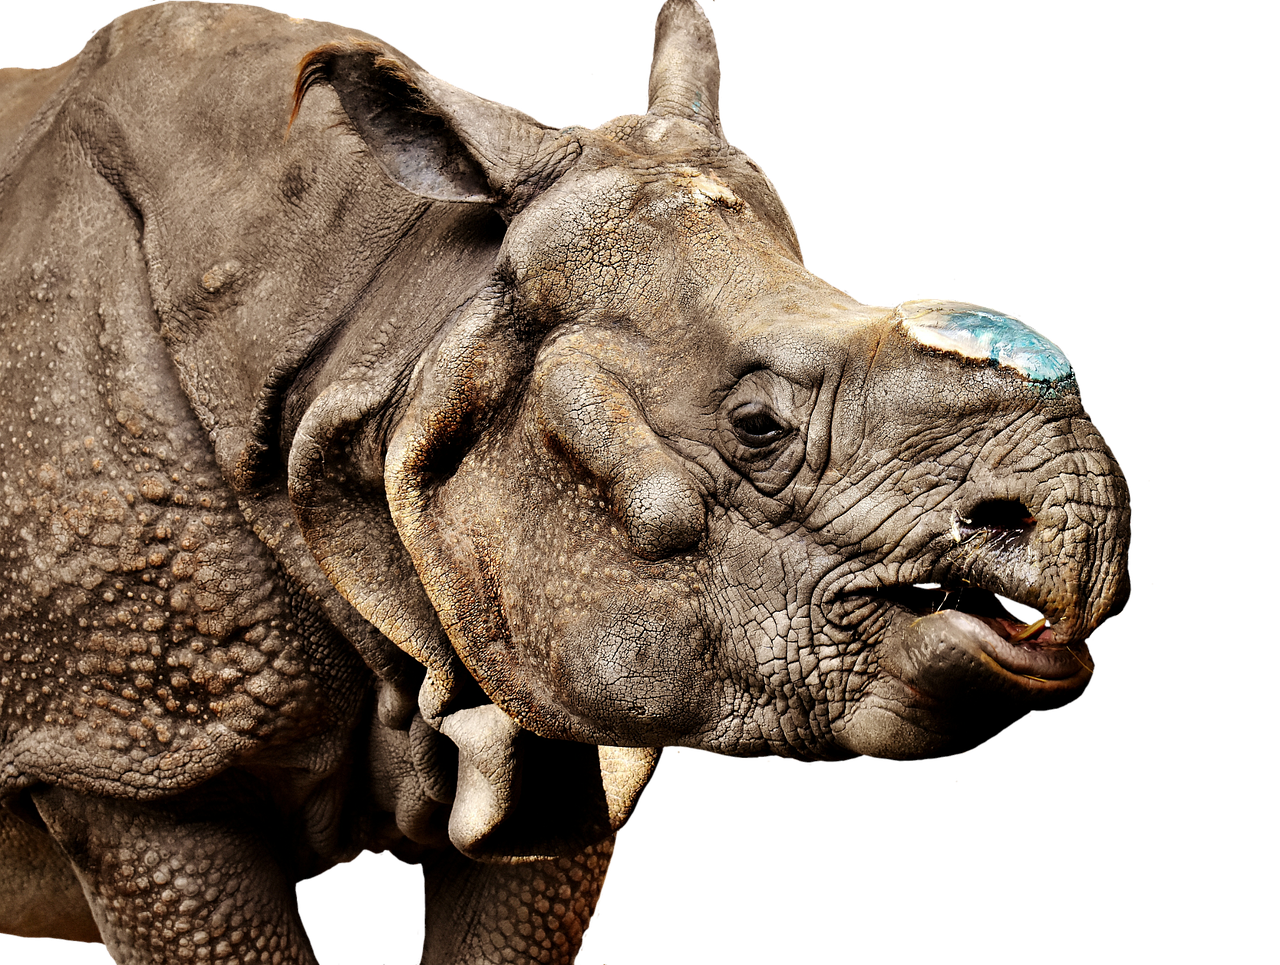 the close up of a rhinoceros'face and back, it looks like it has a very large ear ring